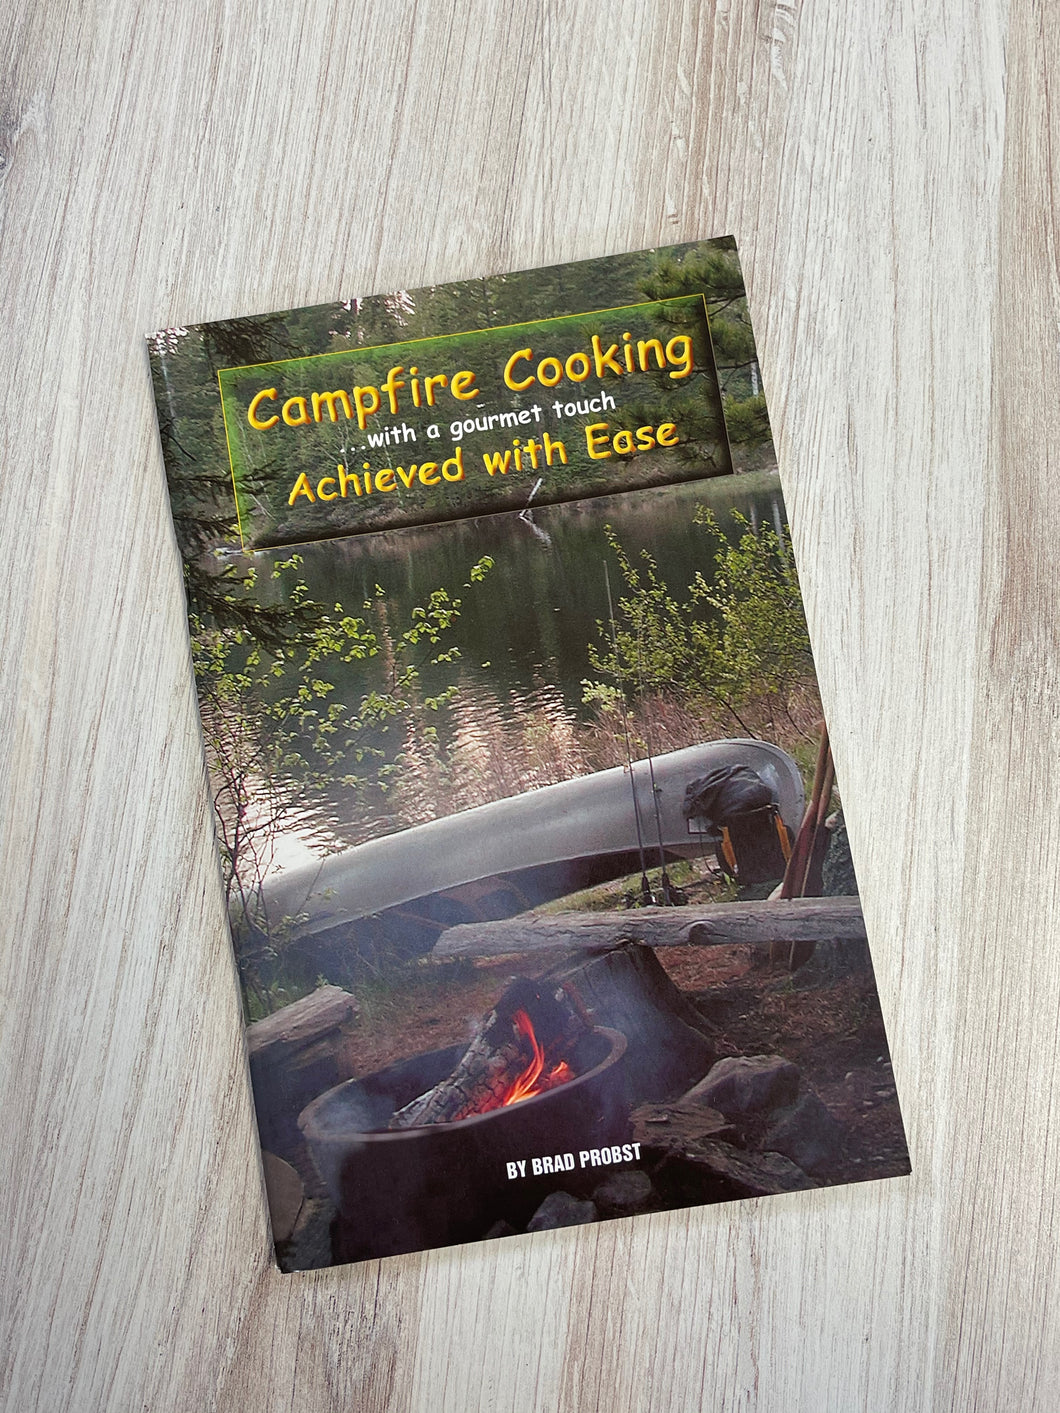 Campfire Cooking ~ achieved with ease… - By Brad Probst Cookbook